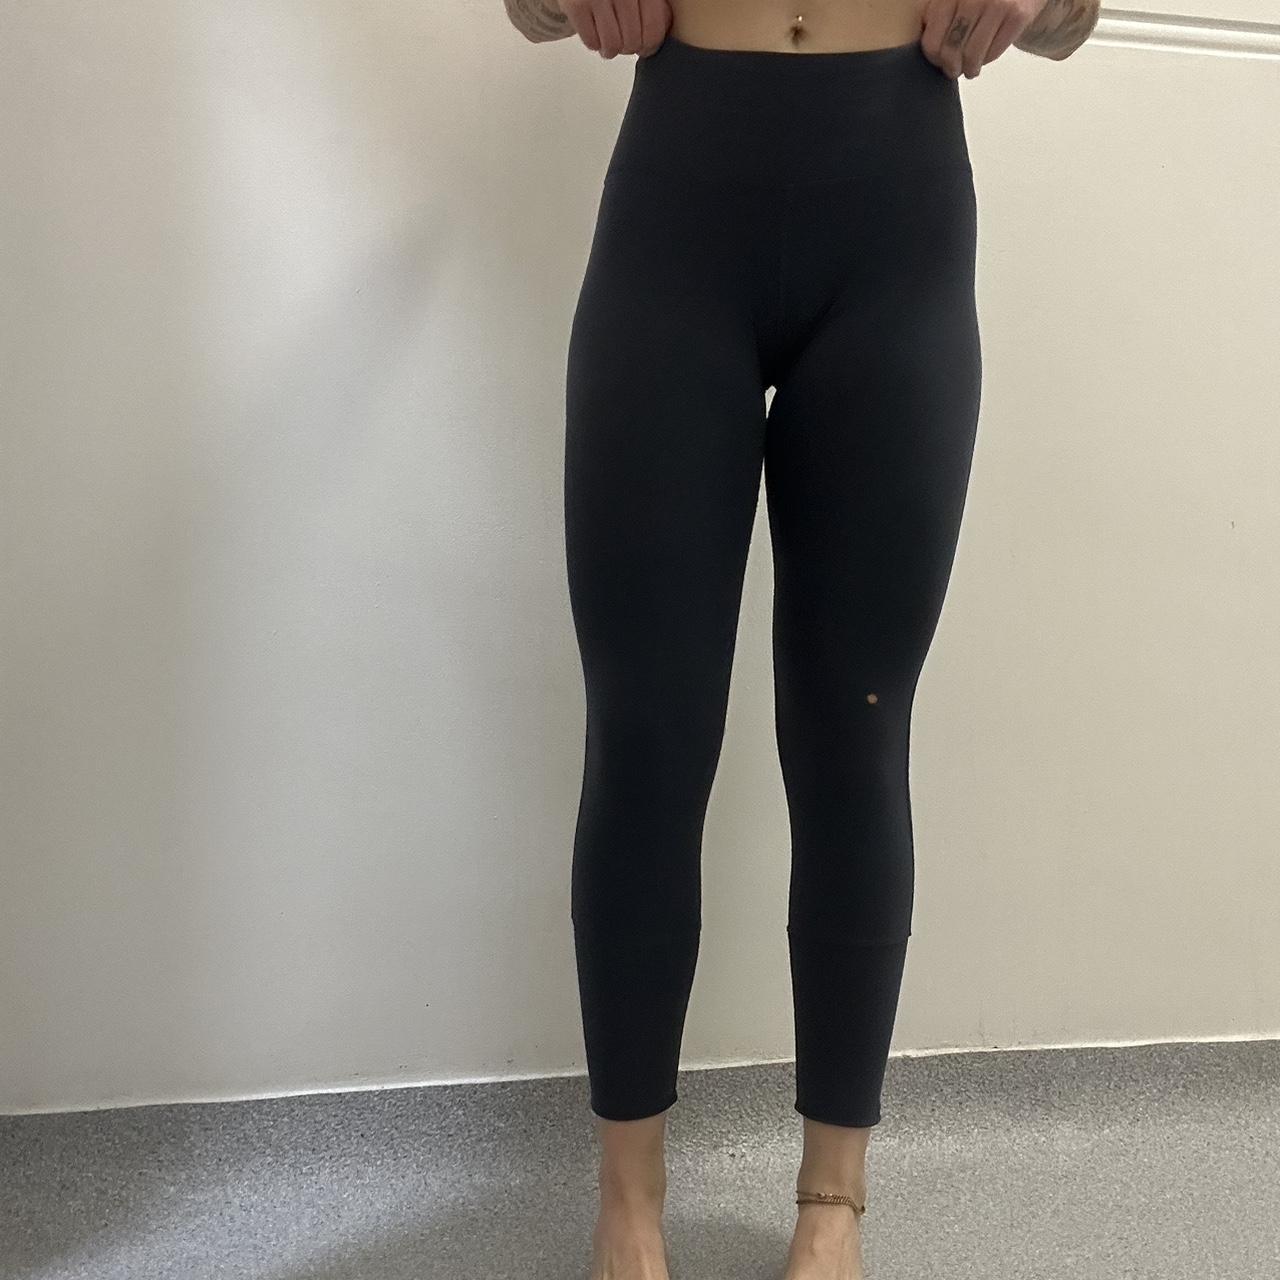 Lorna Jane leggings. I have had a a lot of love from... - Depop